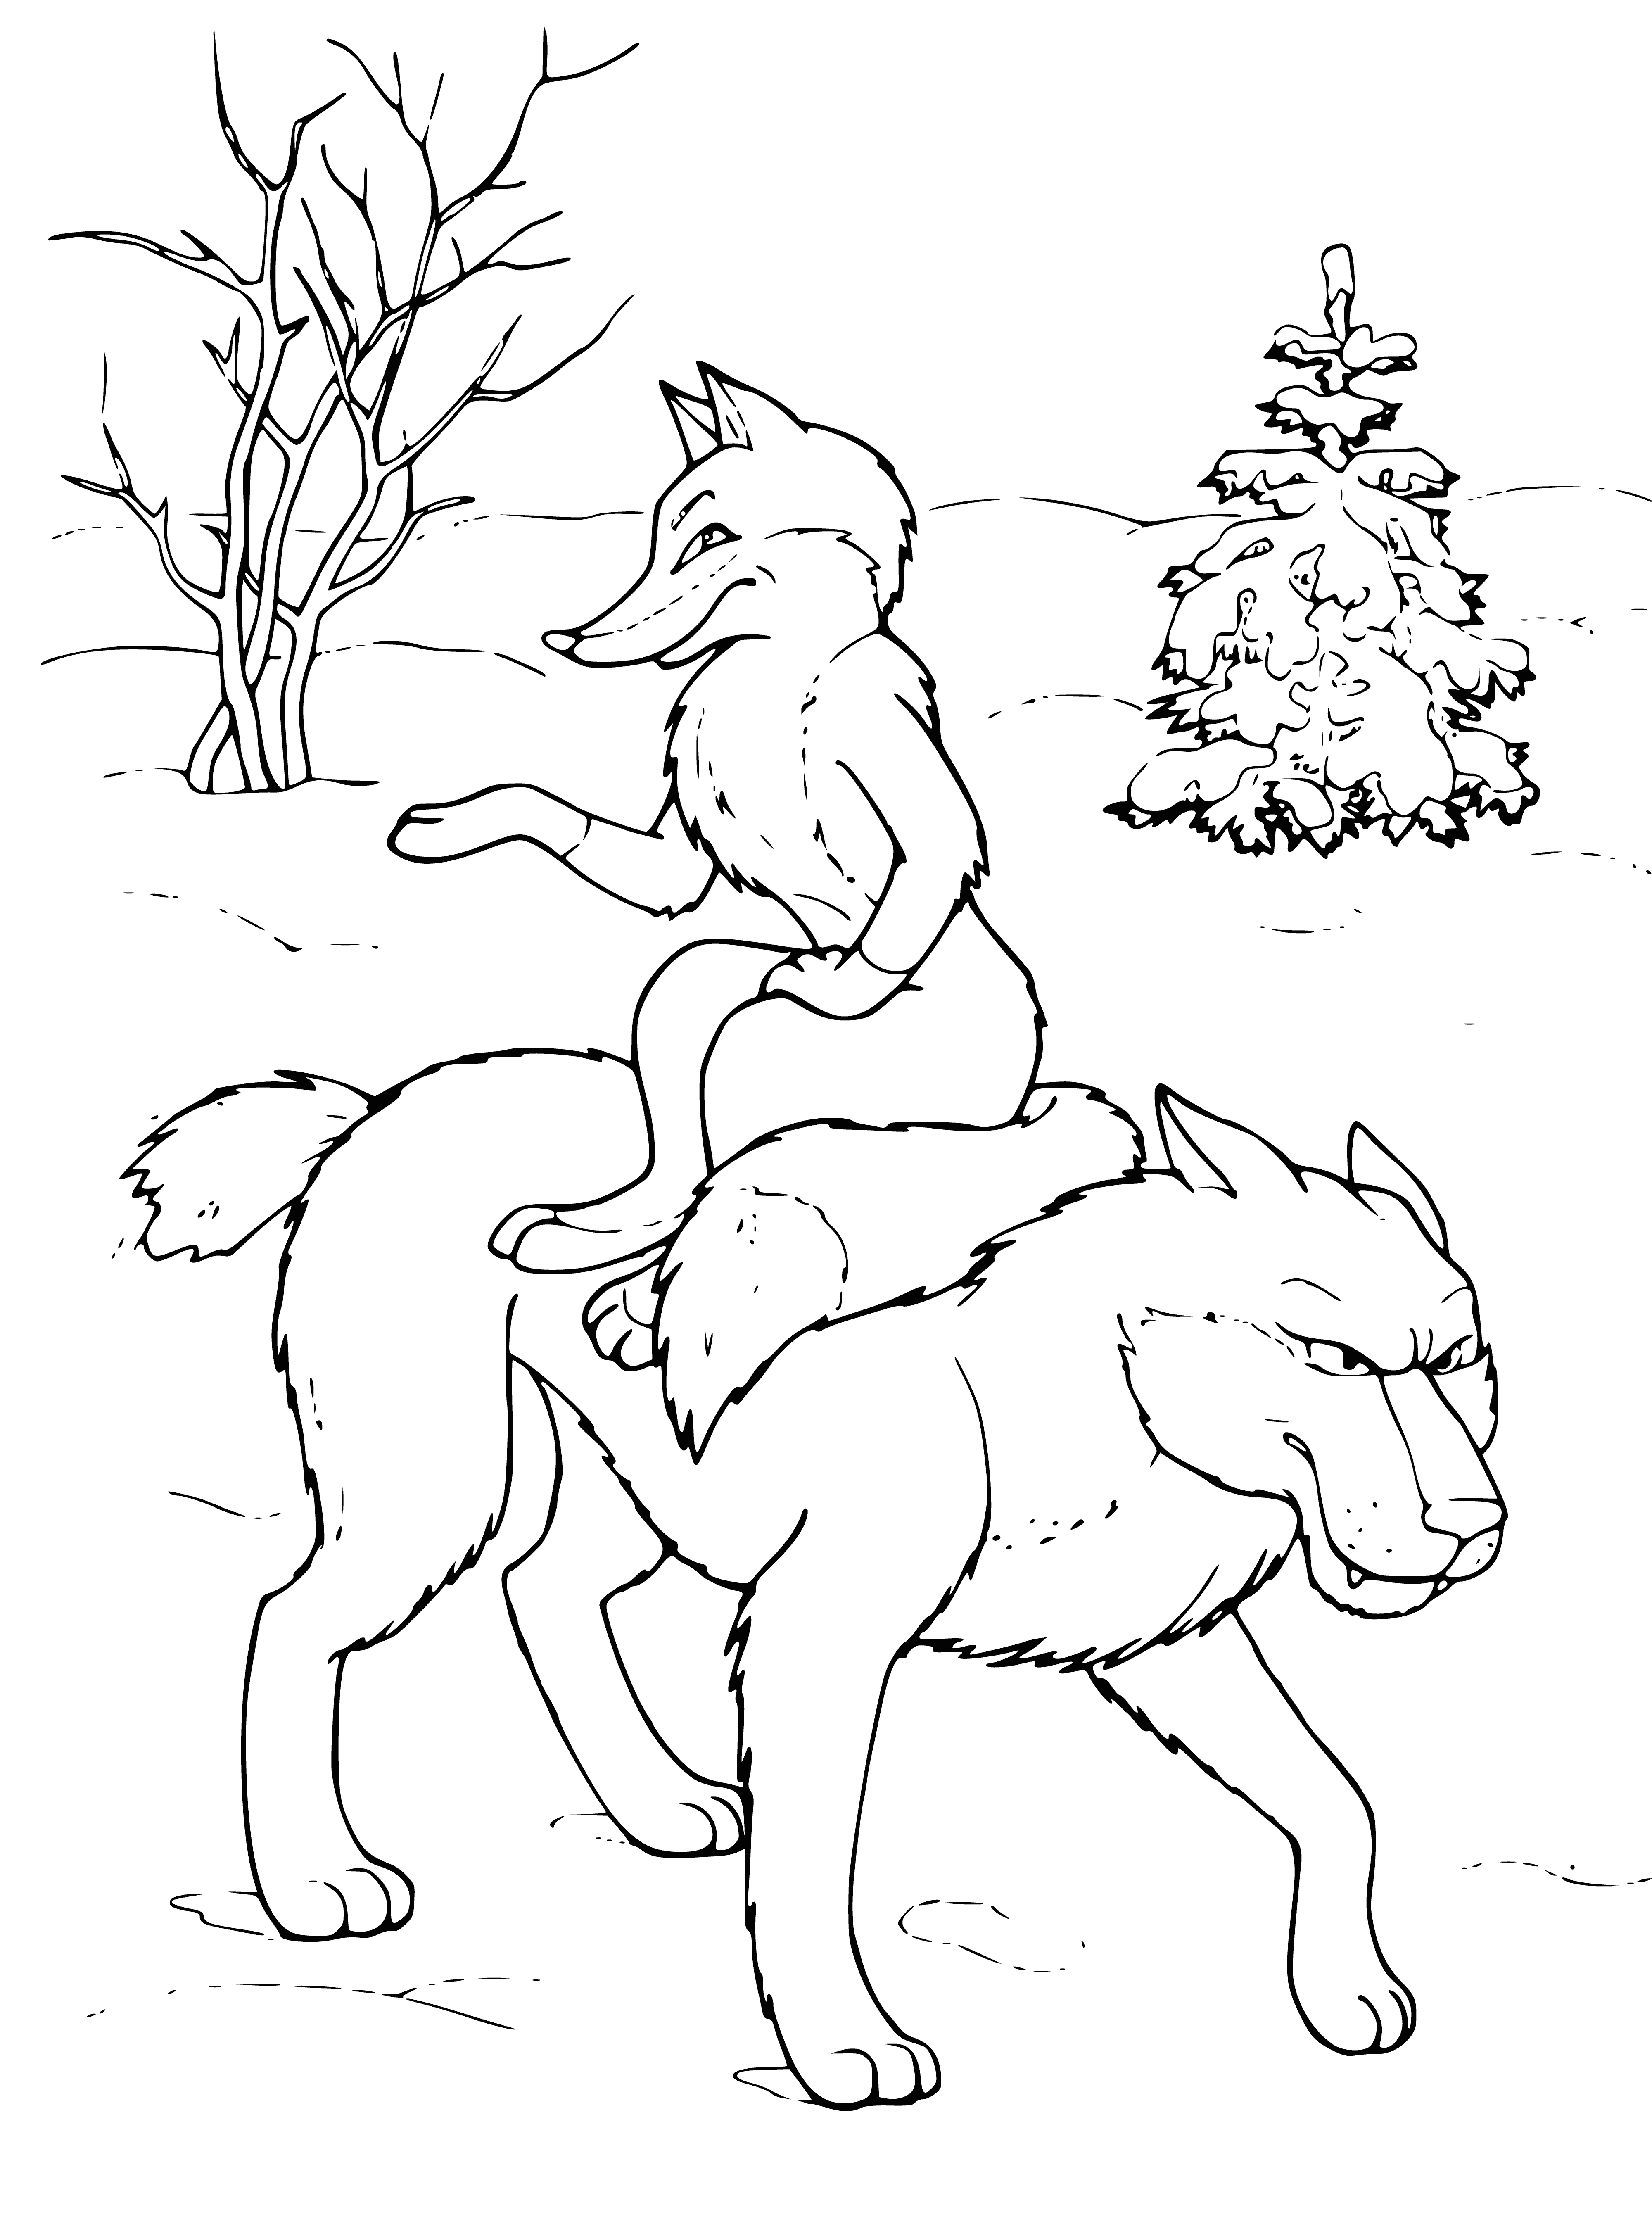 coloring page: Girl in yellow dress walks through forest with basket of food. Wolf follows, watching her.